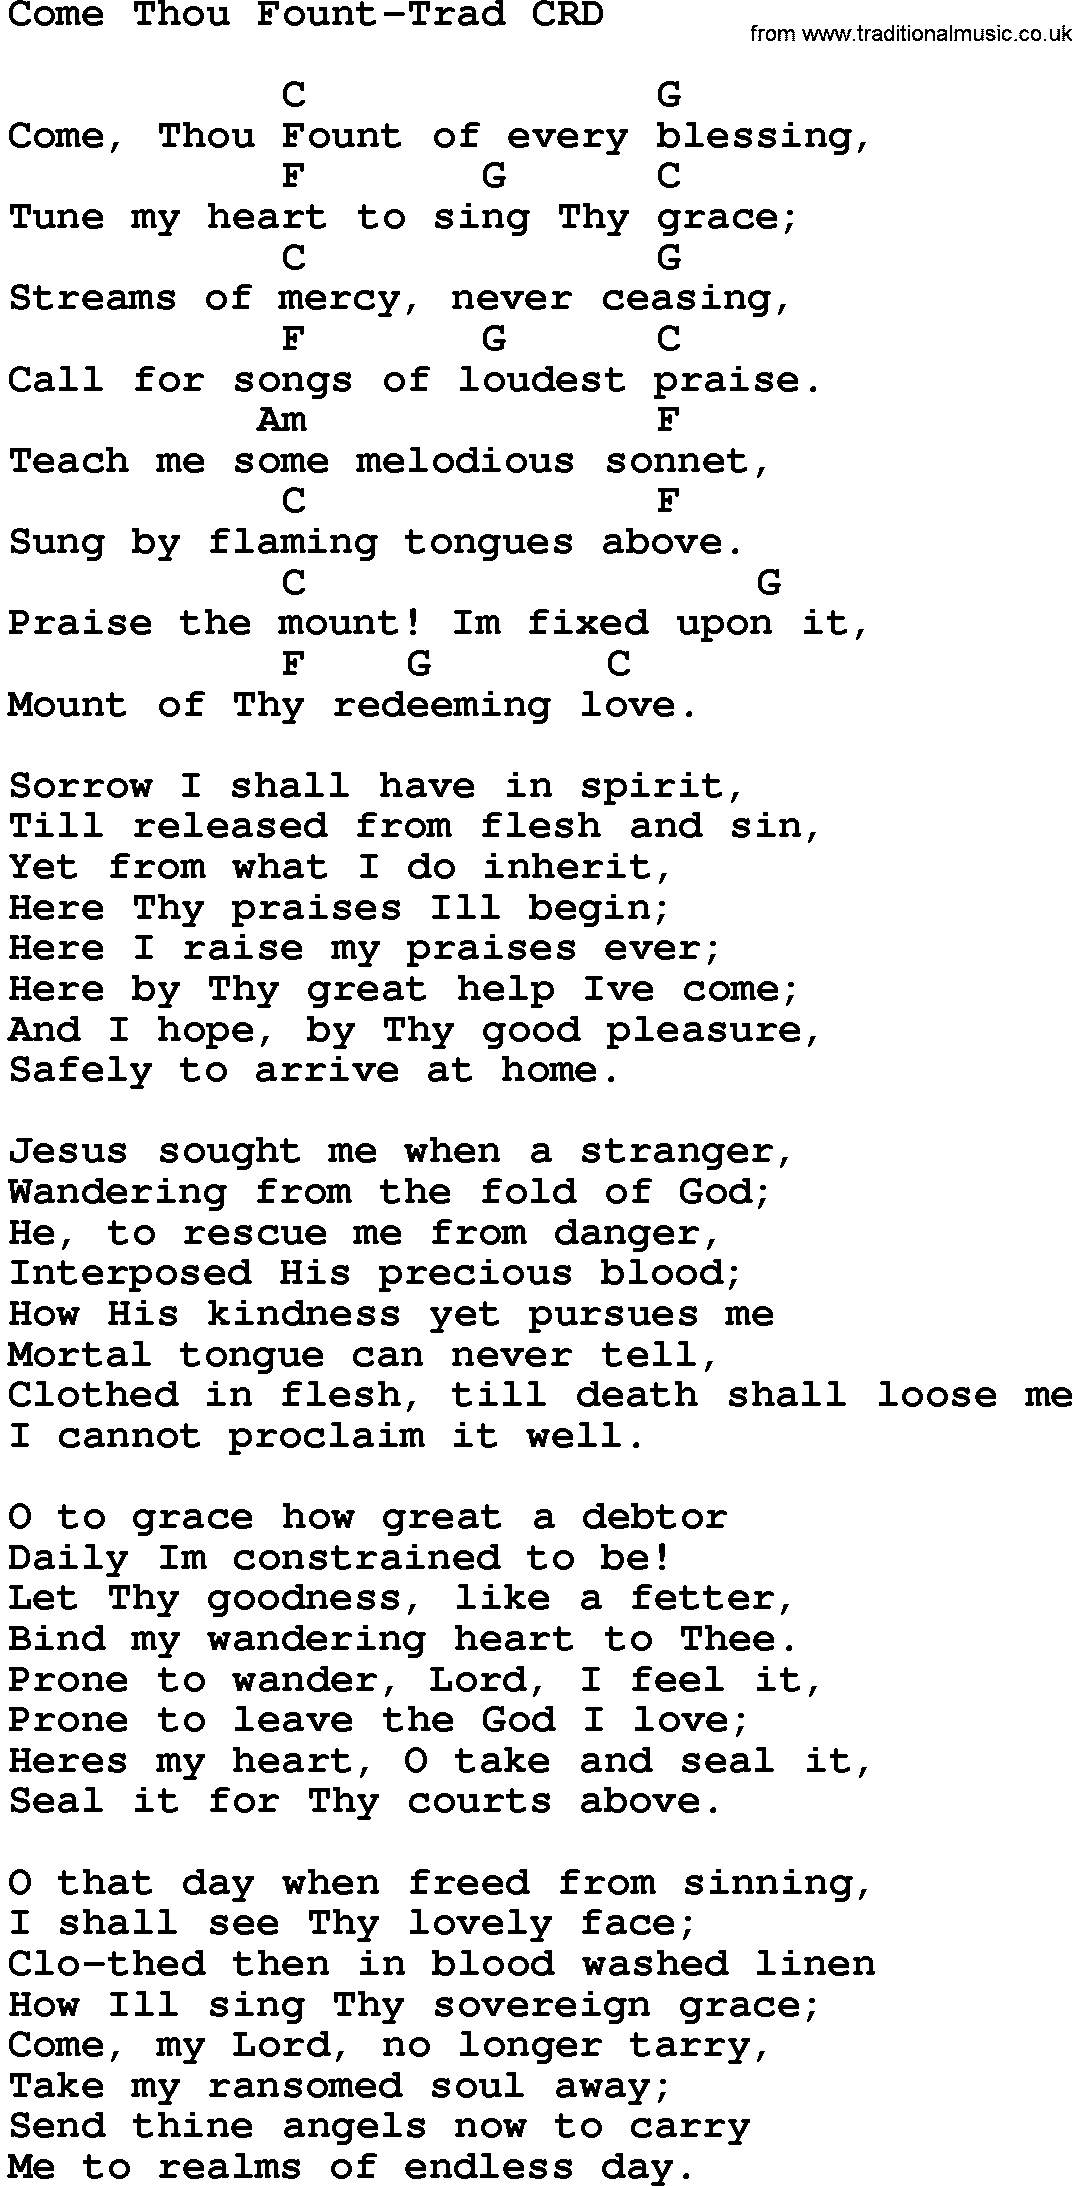 Gospel Song: Come Thou Fount-Trad, lyrics and chords.